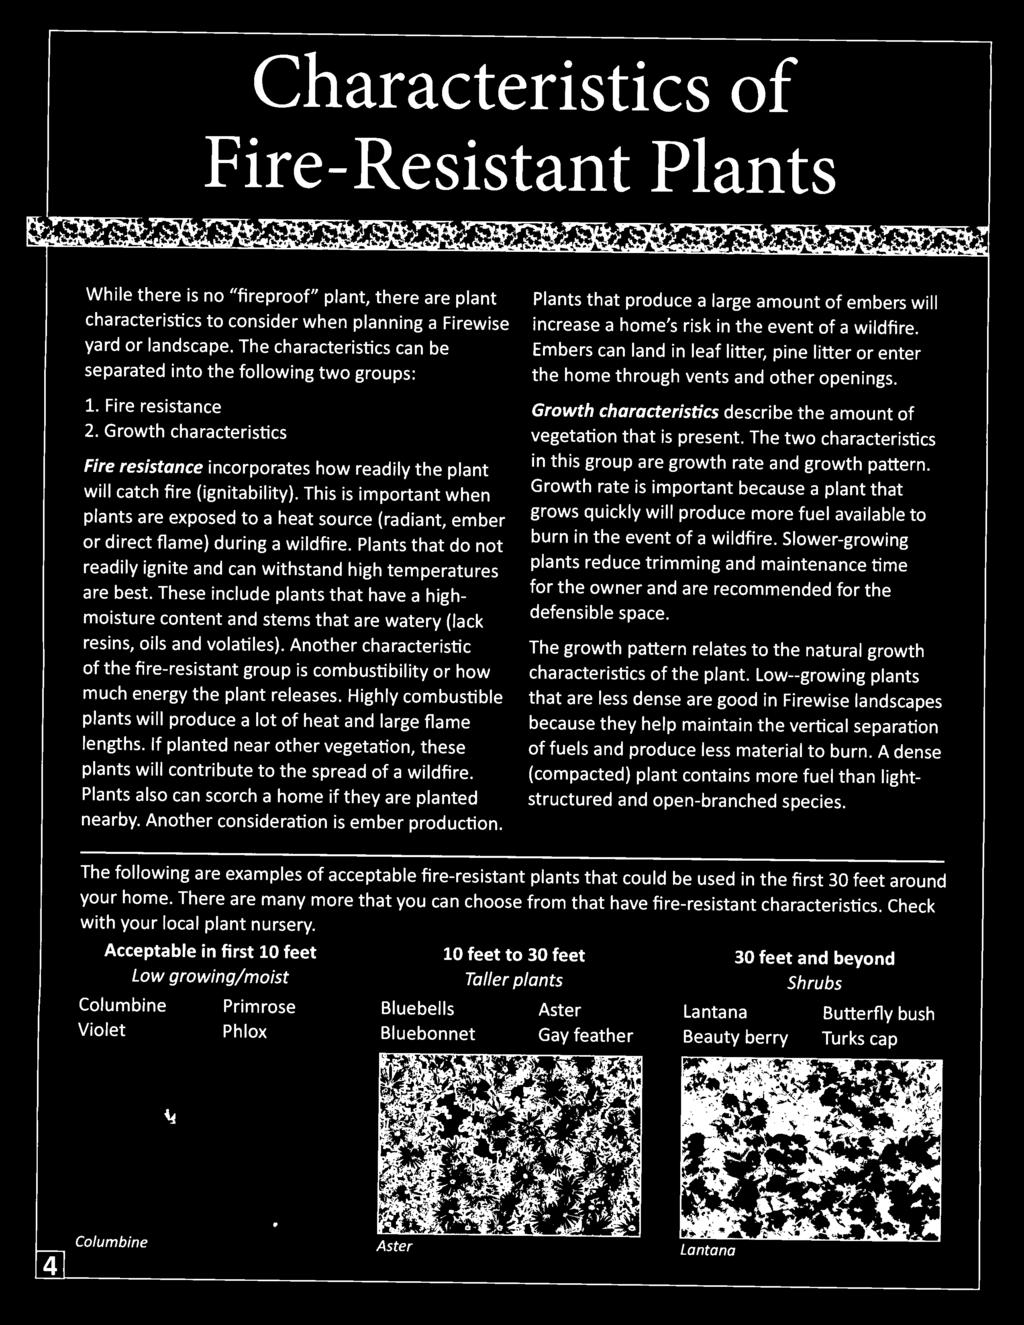 This is important when plants are exposed to a heat source (radiant, ember or direct flame) during a wildfire. Plants that do not readily ignite and can withstand high temperatures are best.